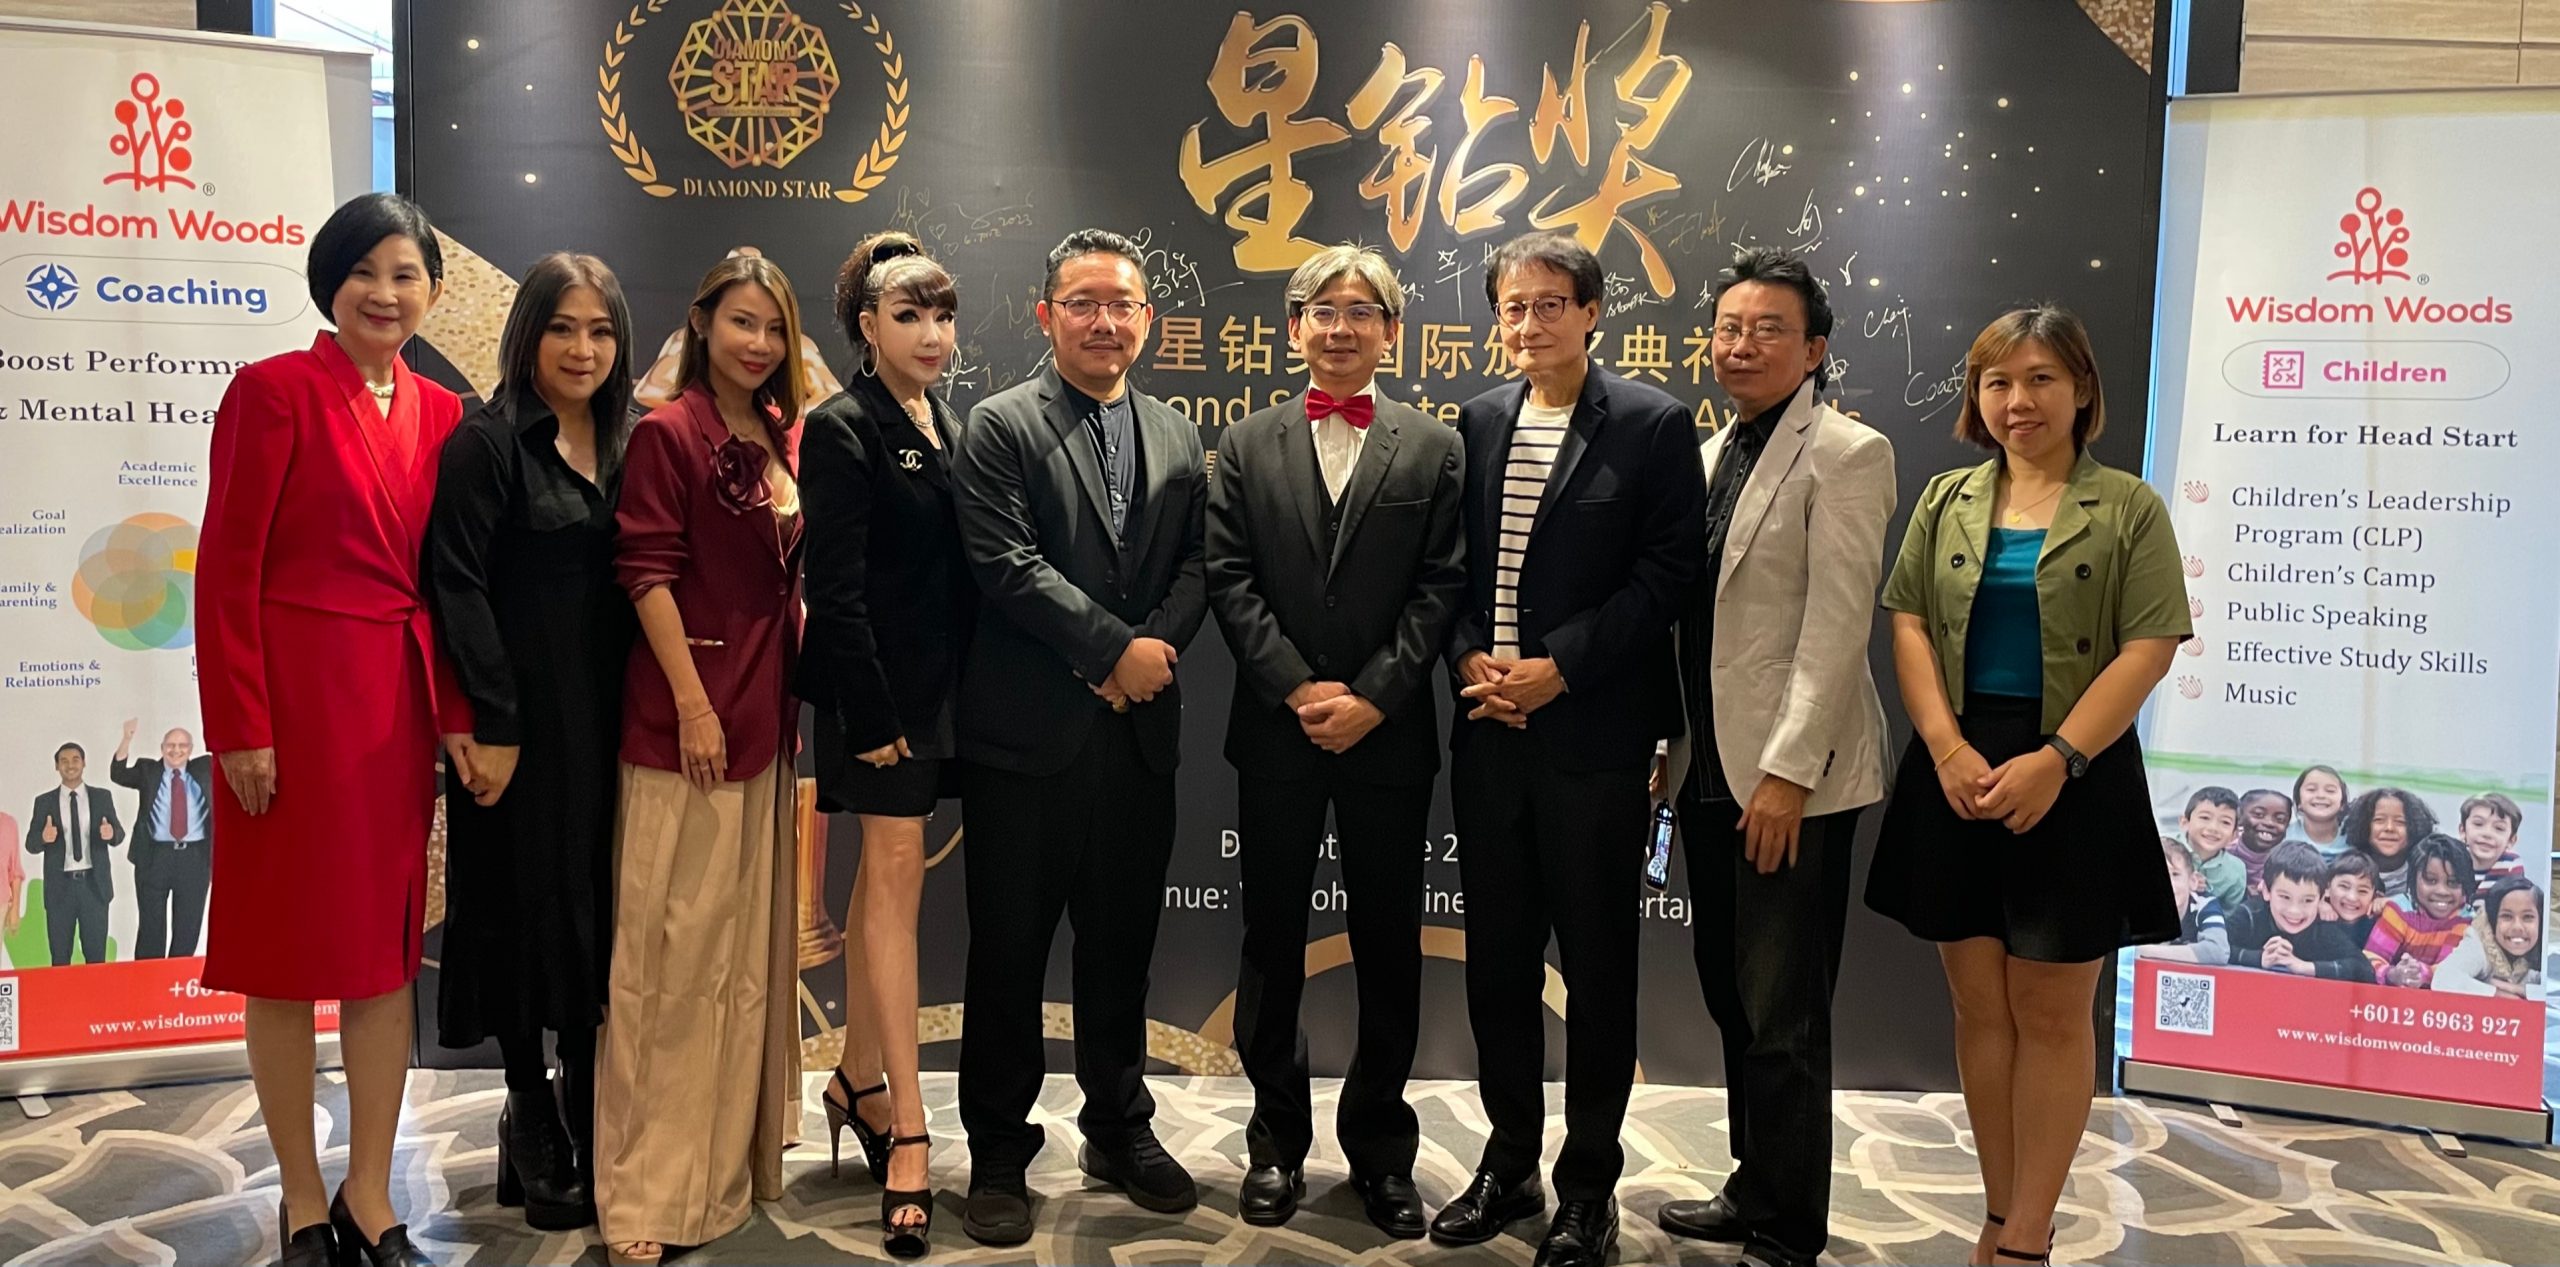 The Deputy Manager (Administration/Publishing) of the newspaper, Zhang Zhizhi (1st from the right), attended the press conference and took a group photo with the guests. From left: Lin Yueying, Qianyun, Yu Peifen, Xu Wenshi, He Jinyi, Chen Qiguang, Chen Dong and Yi Lun.